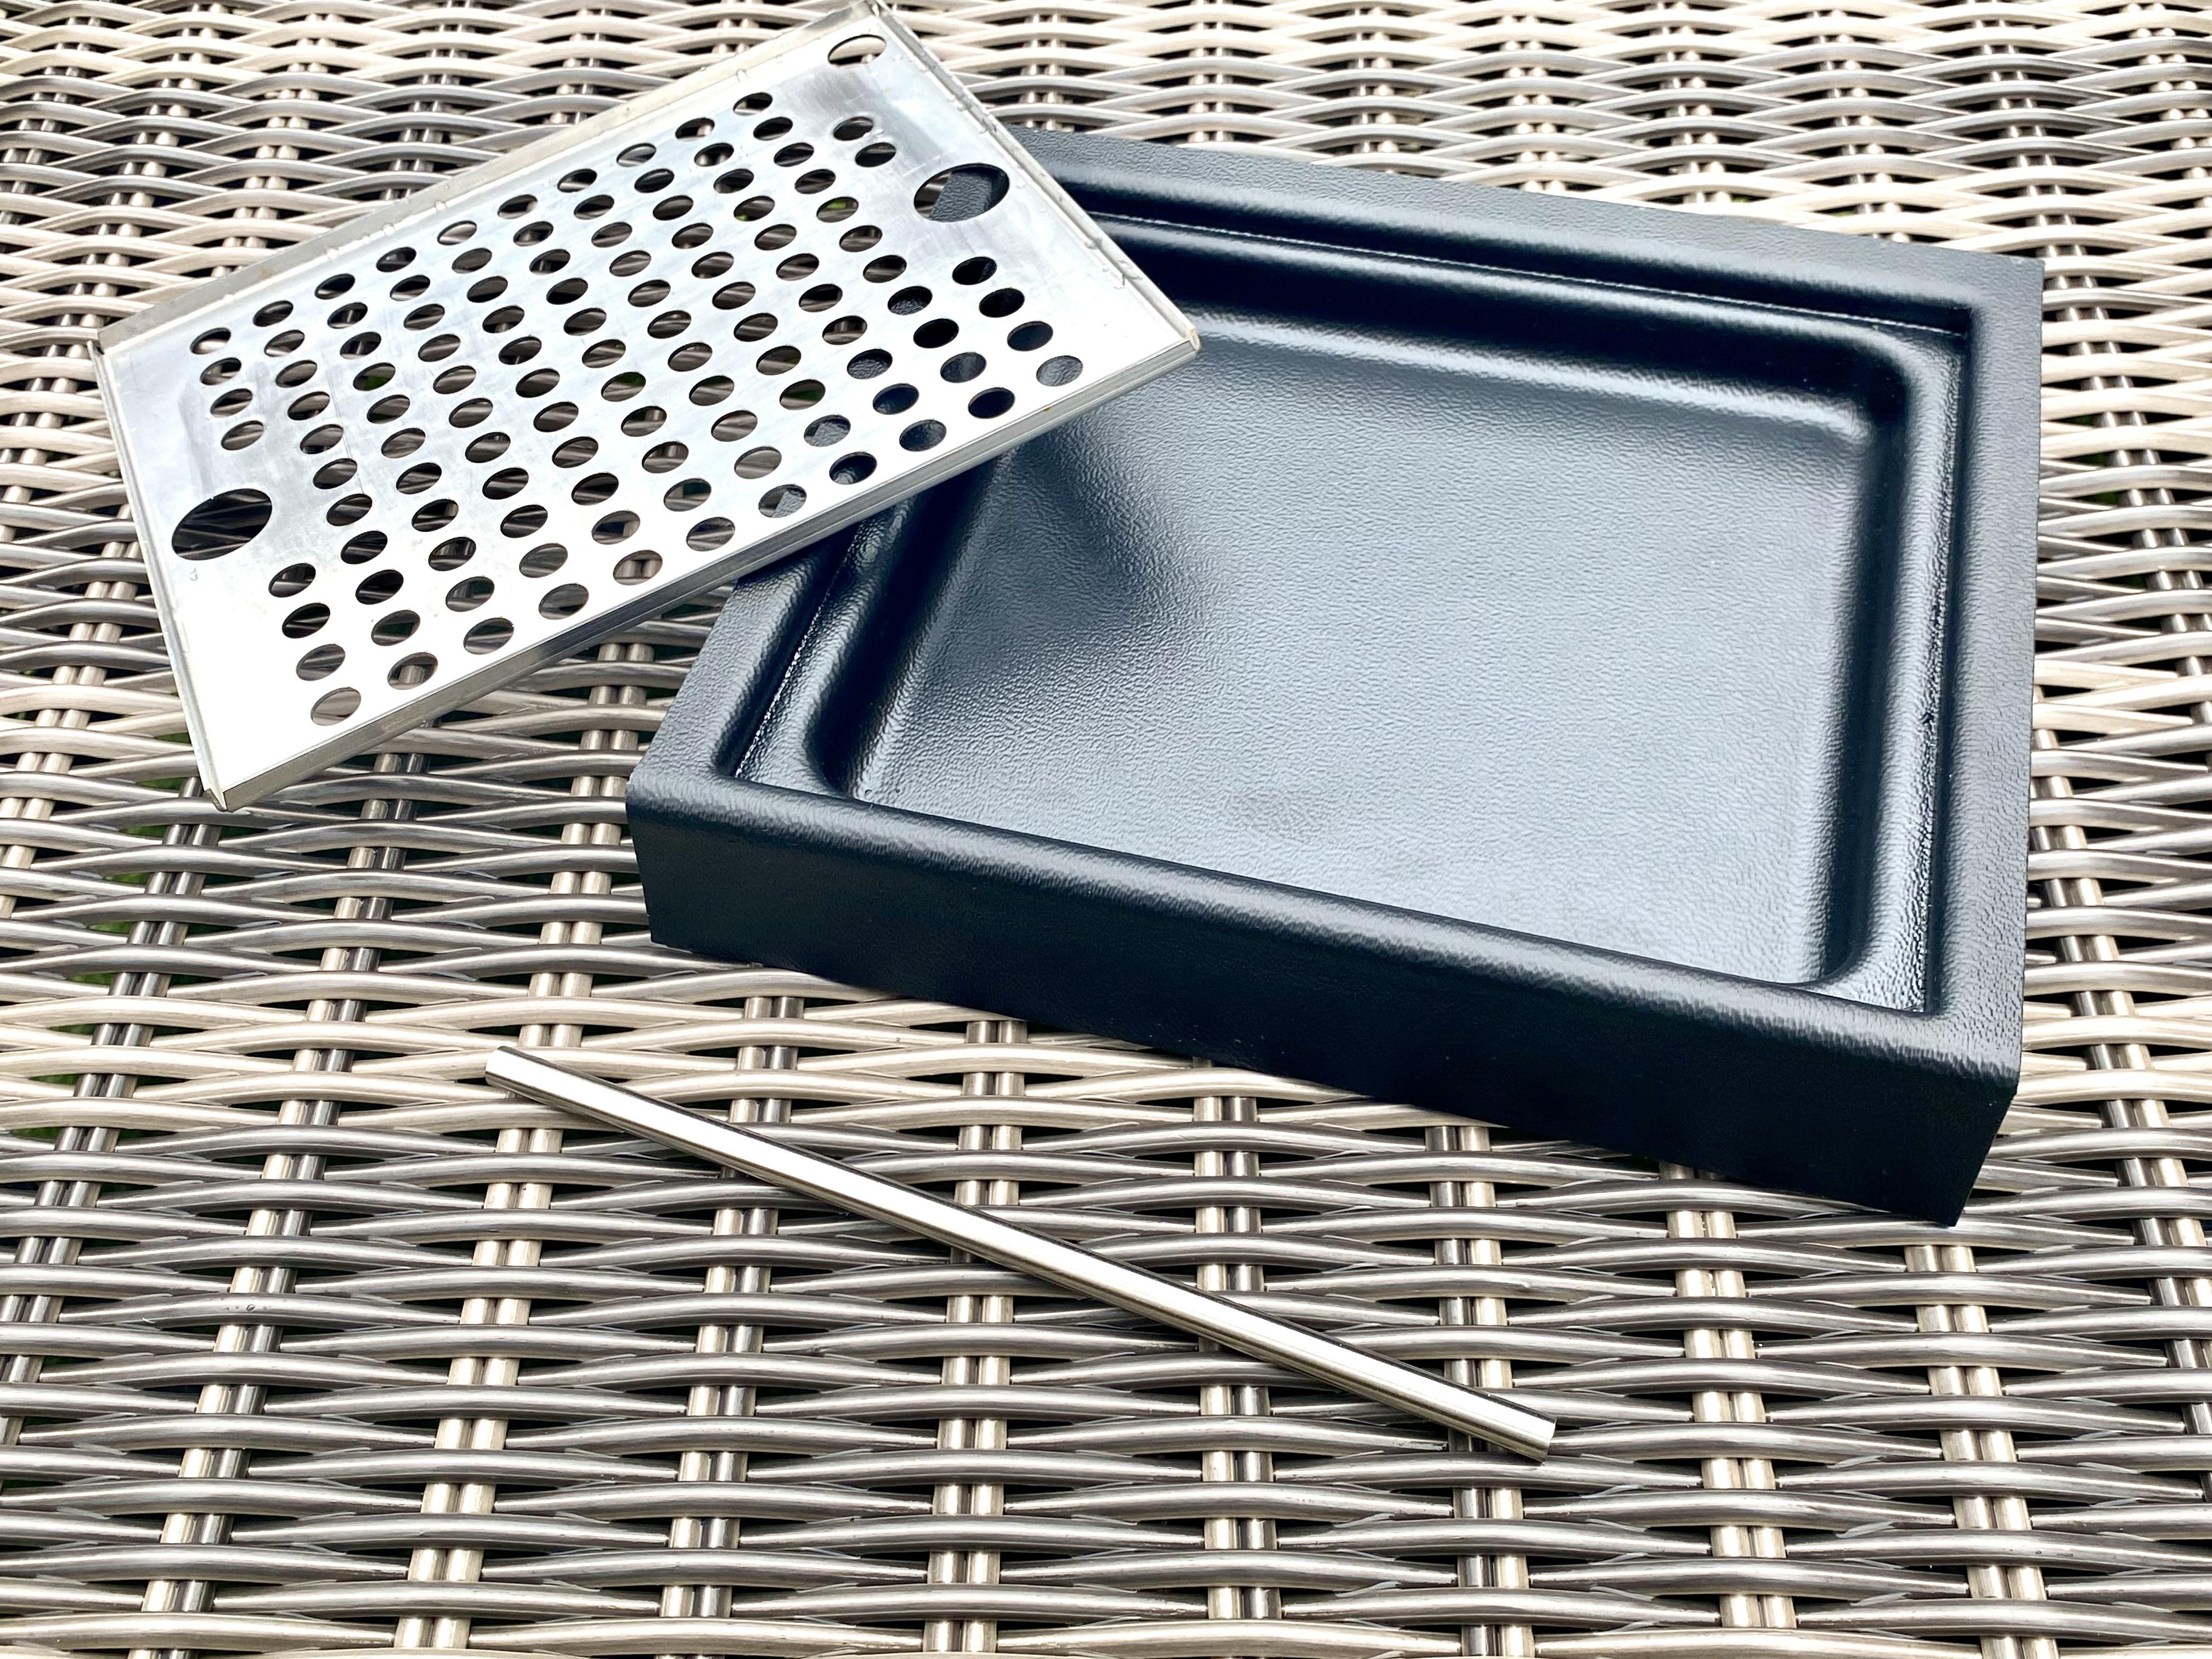 Extended MAX Drip tray with grate and tube 2